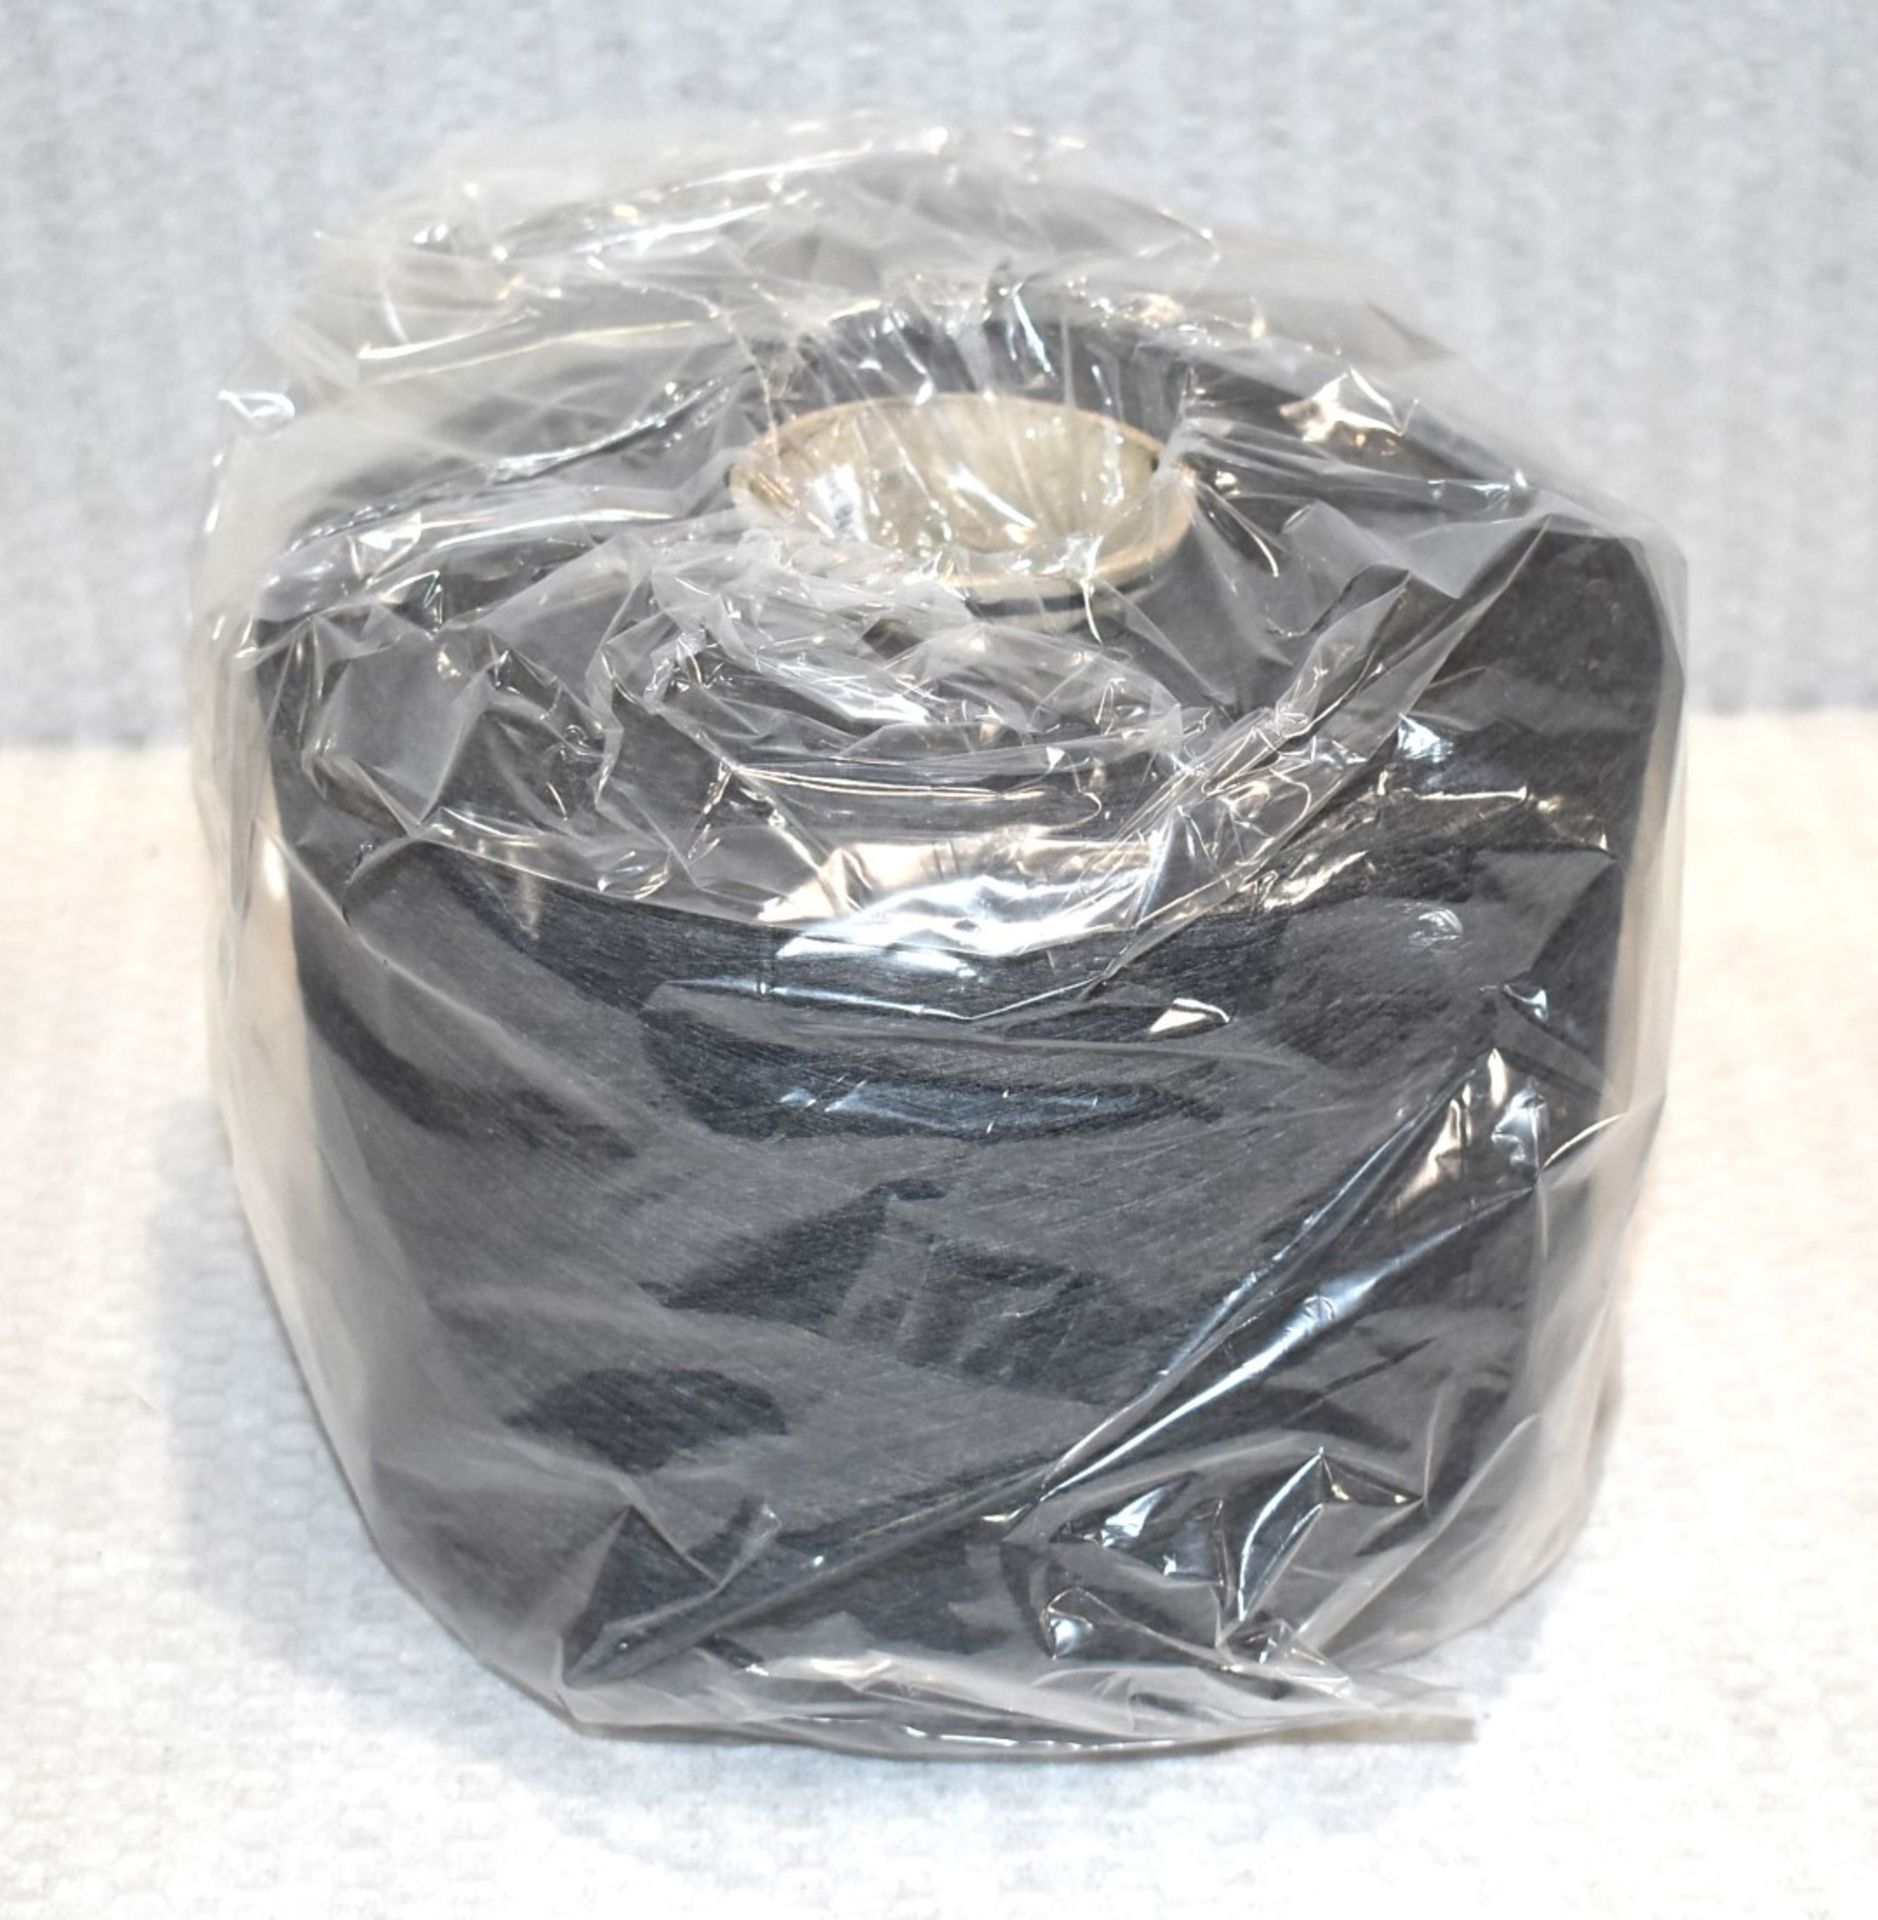 4 x Cones of 1/13 MicroCotton Knitting Yarn - Mid Grey - Approx Weight: 2,500g - New Stock ABL Yarn - Image 13 of 17